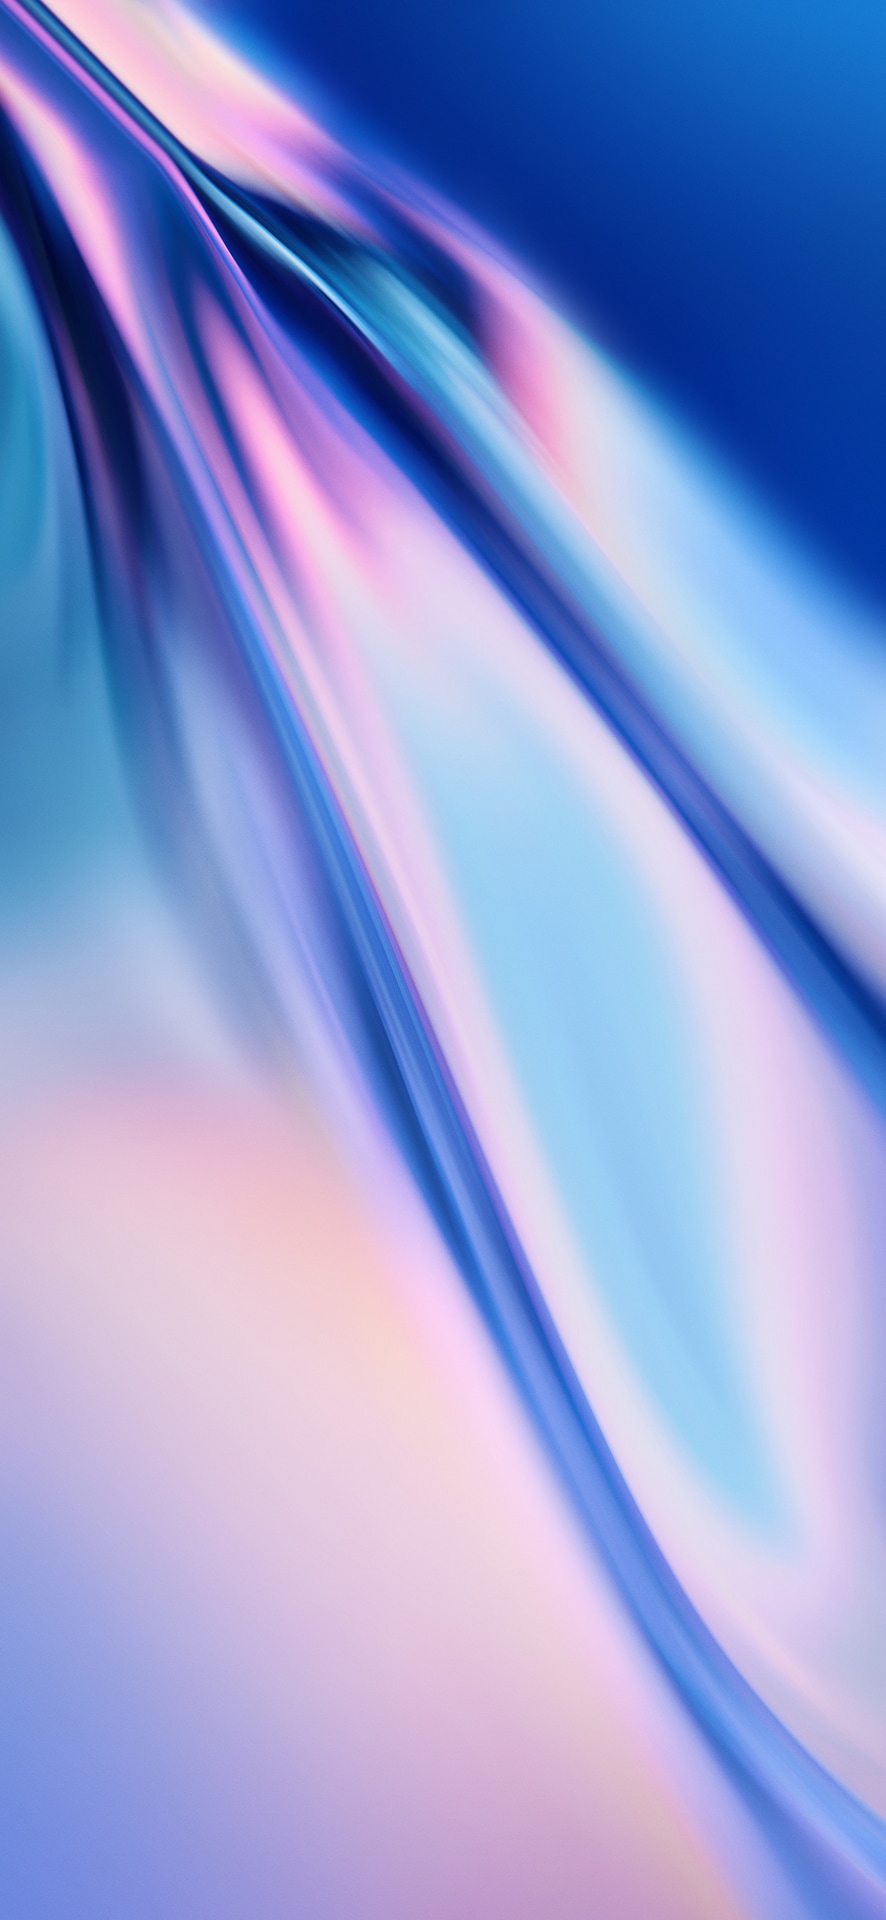 Wallpaper from the OnePlus 7 Pro 8